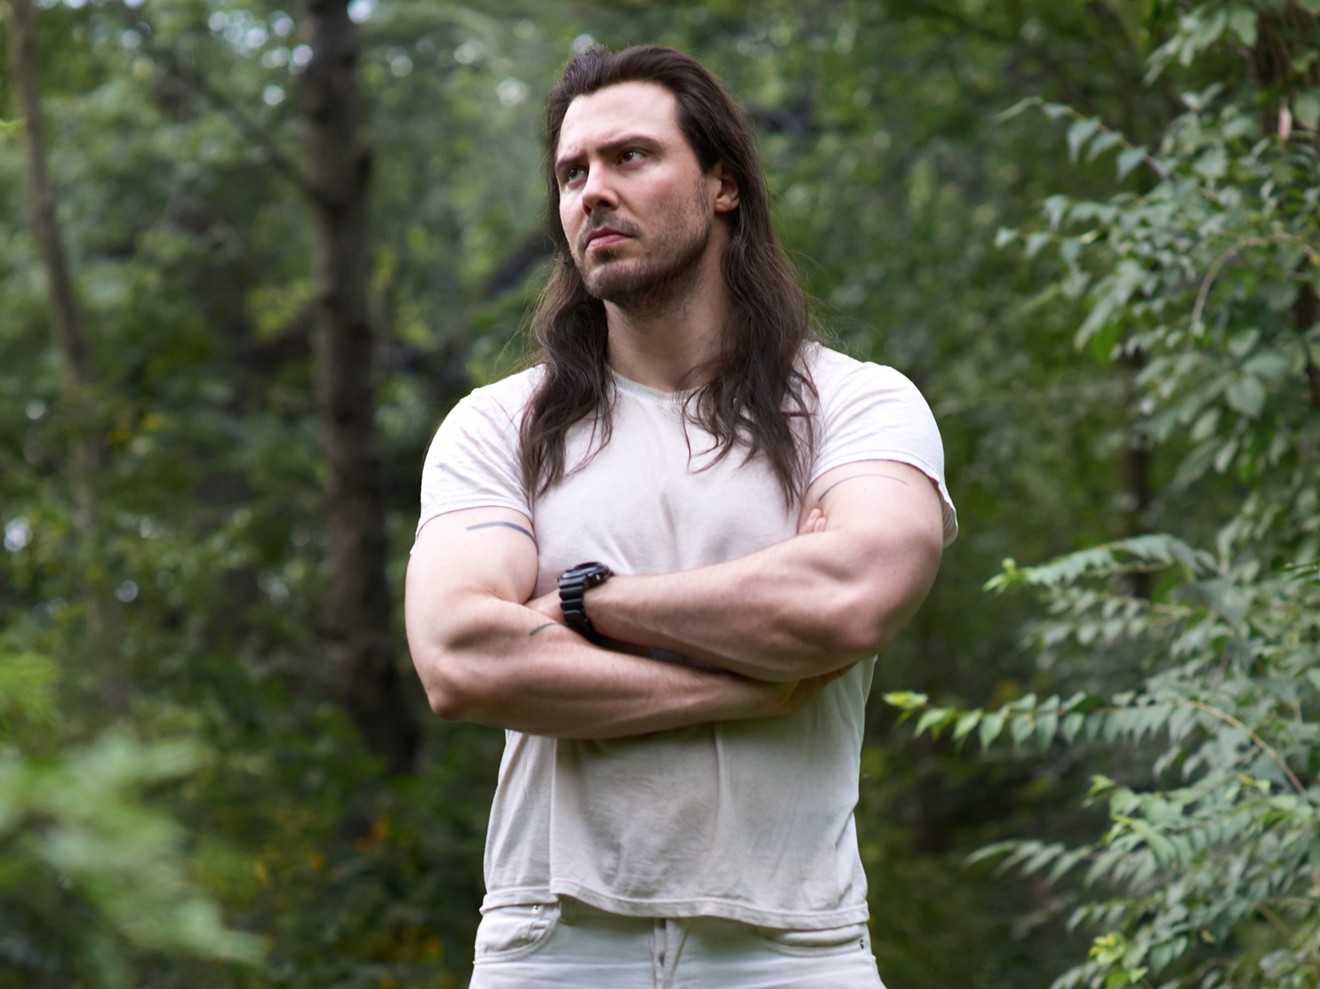 Party rock musician Andrew W.K. will play the House of Blues in Dallas on Wednesday, Oct. 4.